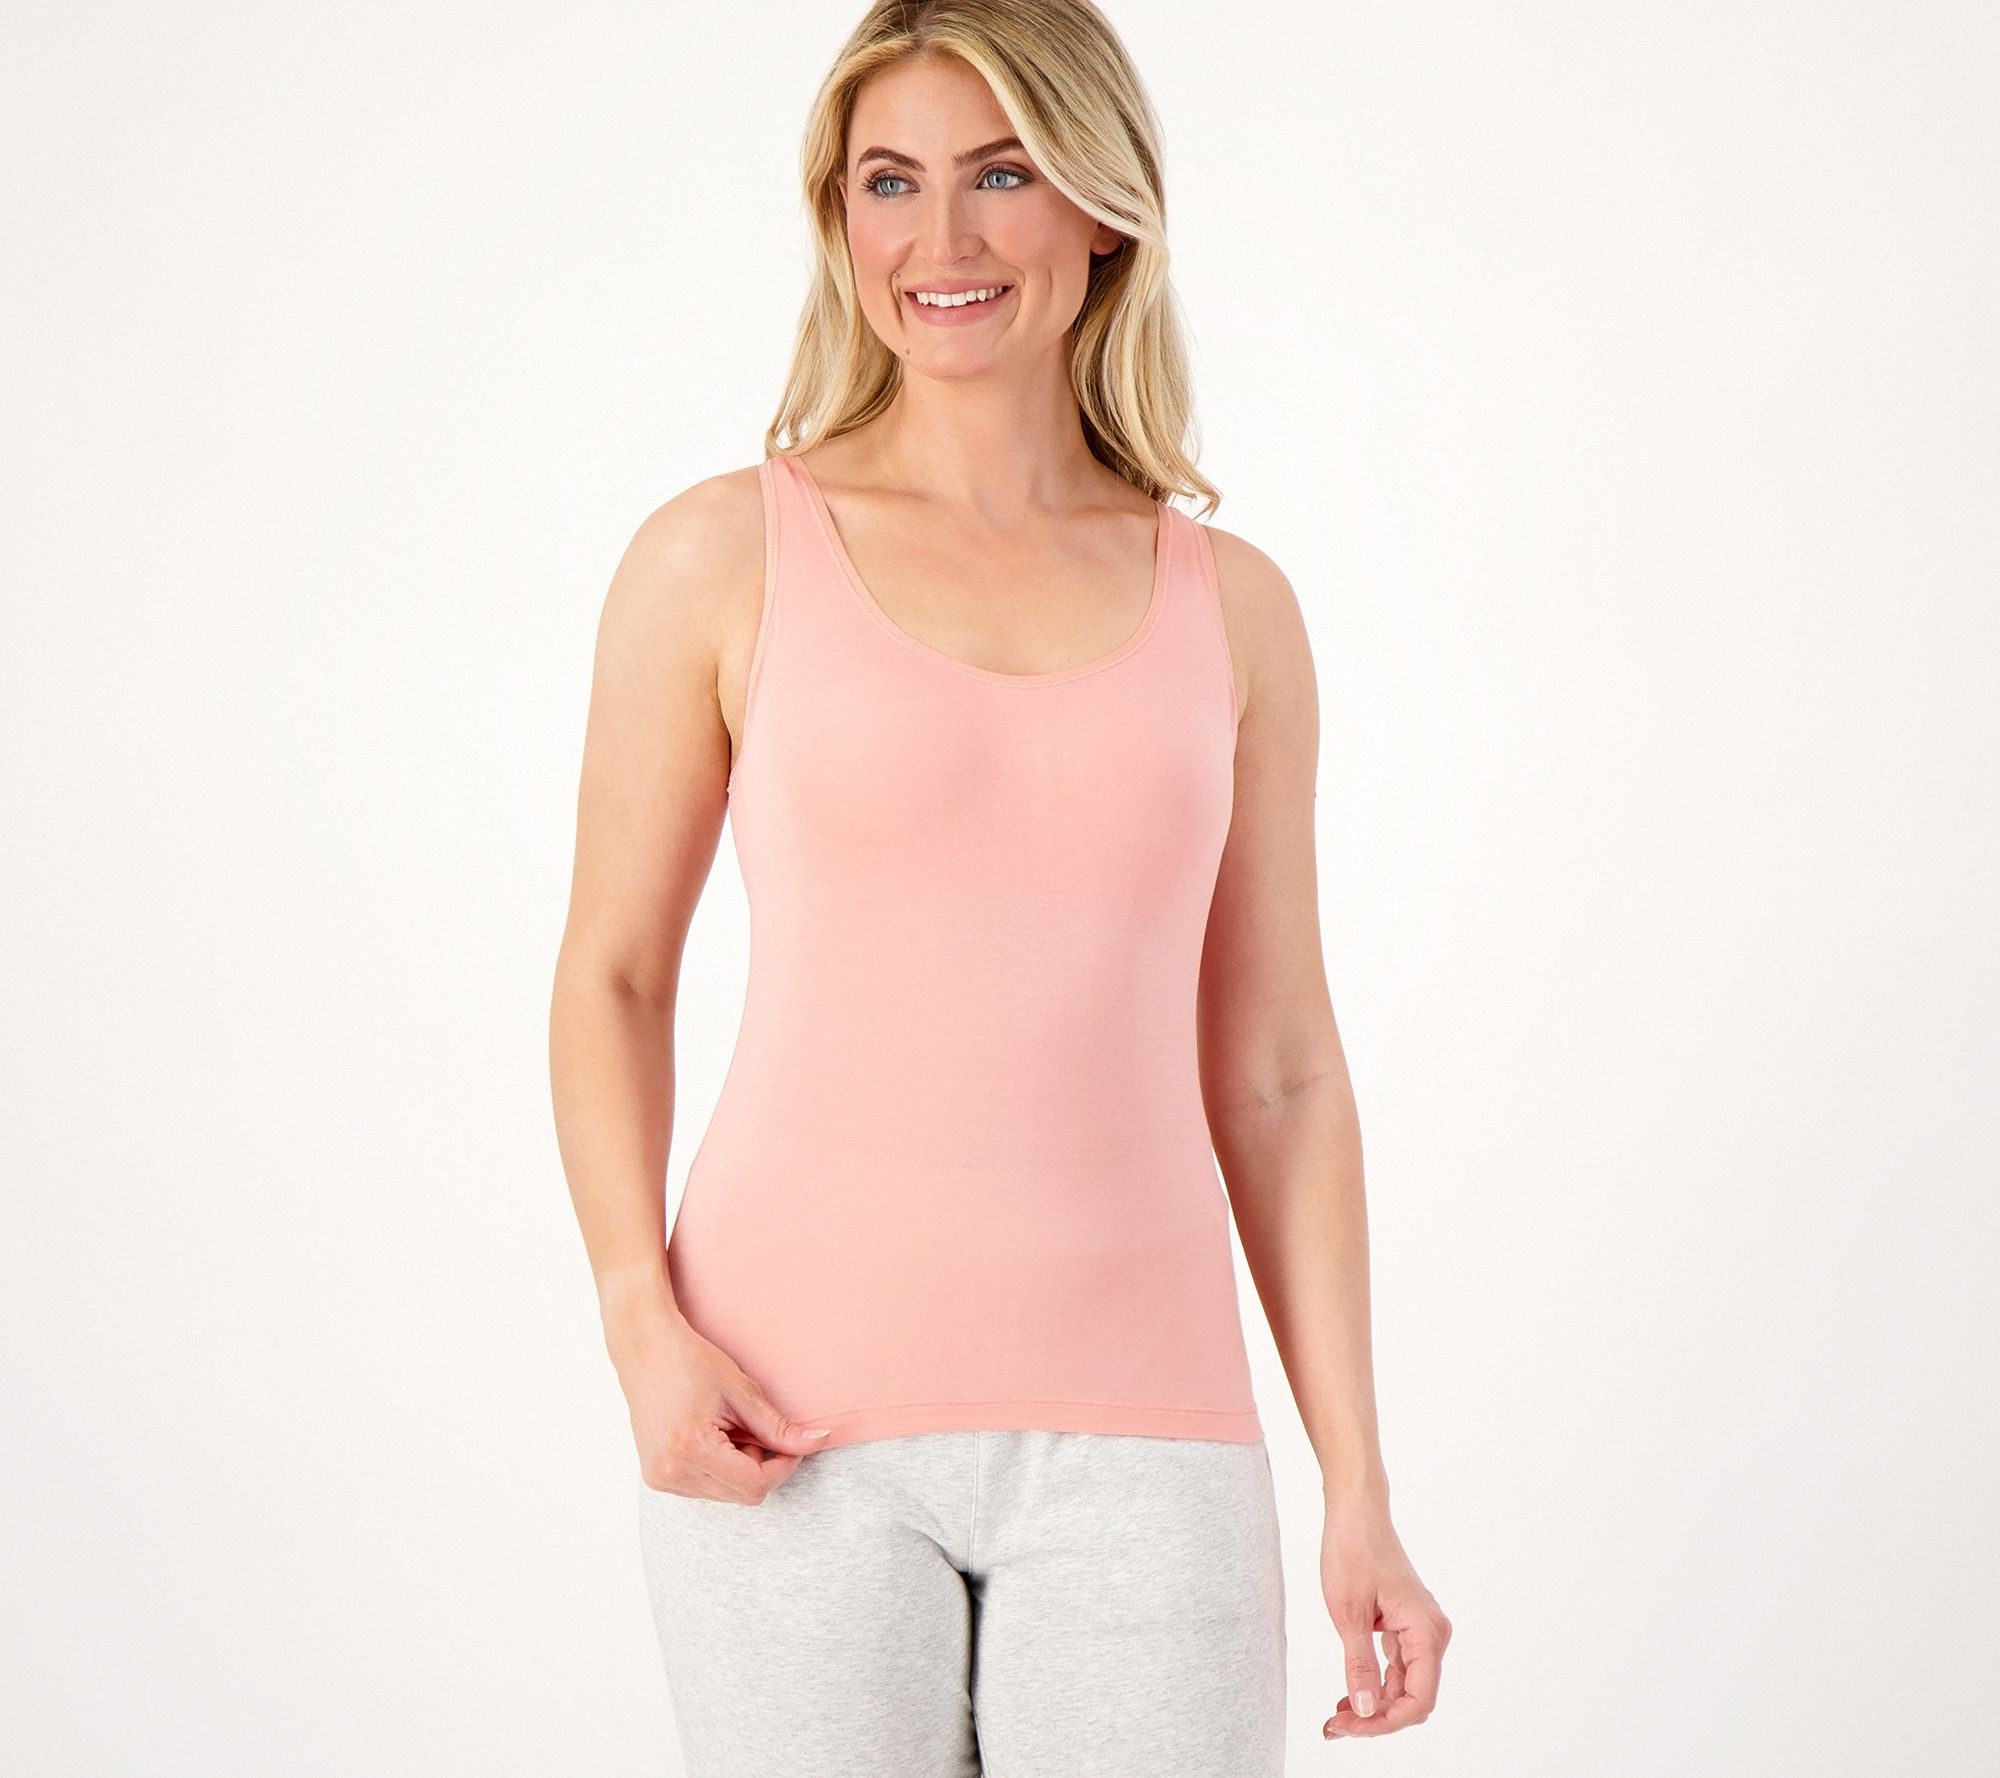 Mrat Clearance Tank Tops with Built in Bras Wireless Plus Size